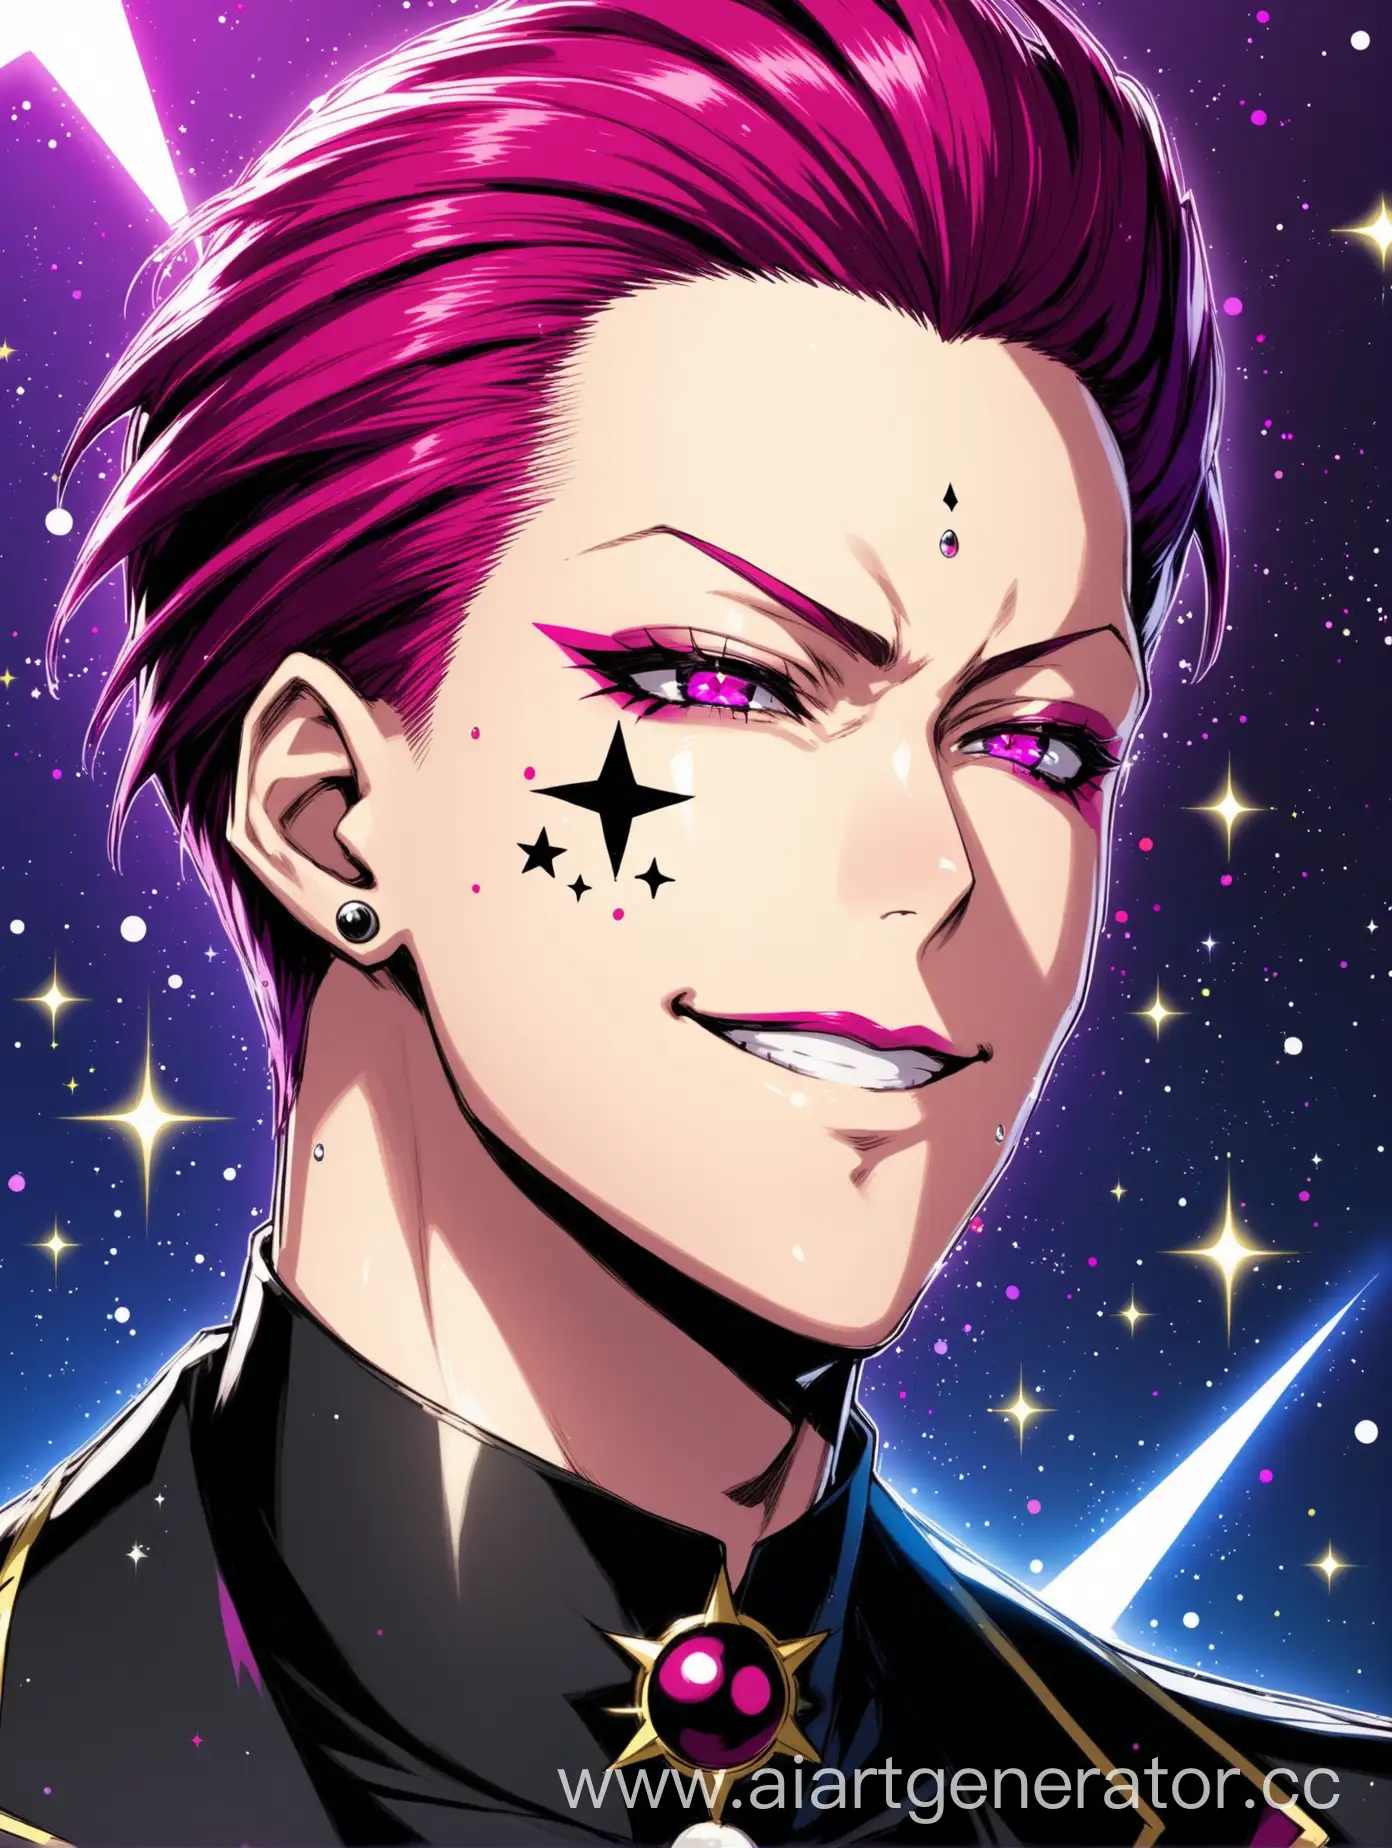 Hisoka-Smirks-in-Expensive-Black-Suit-with-Star-and-Drop-Face-Art